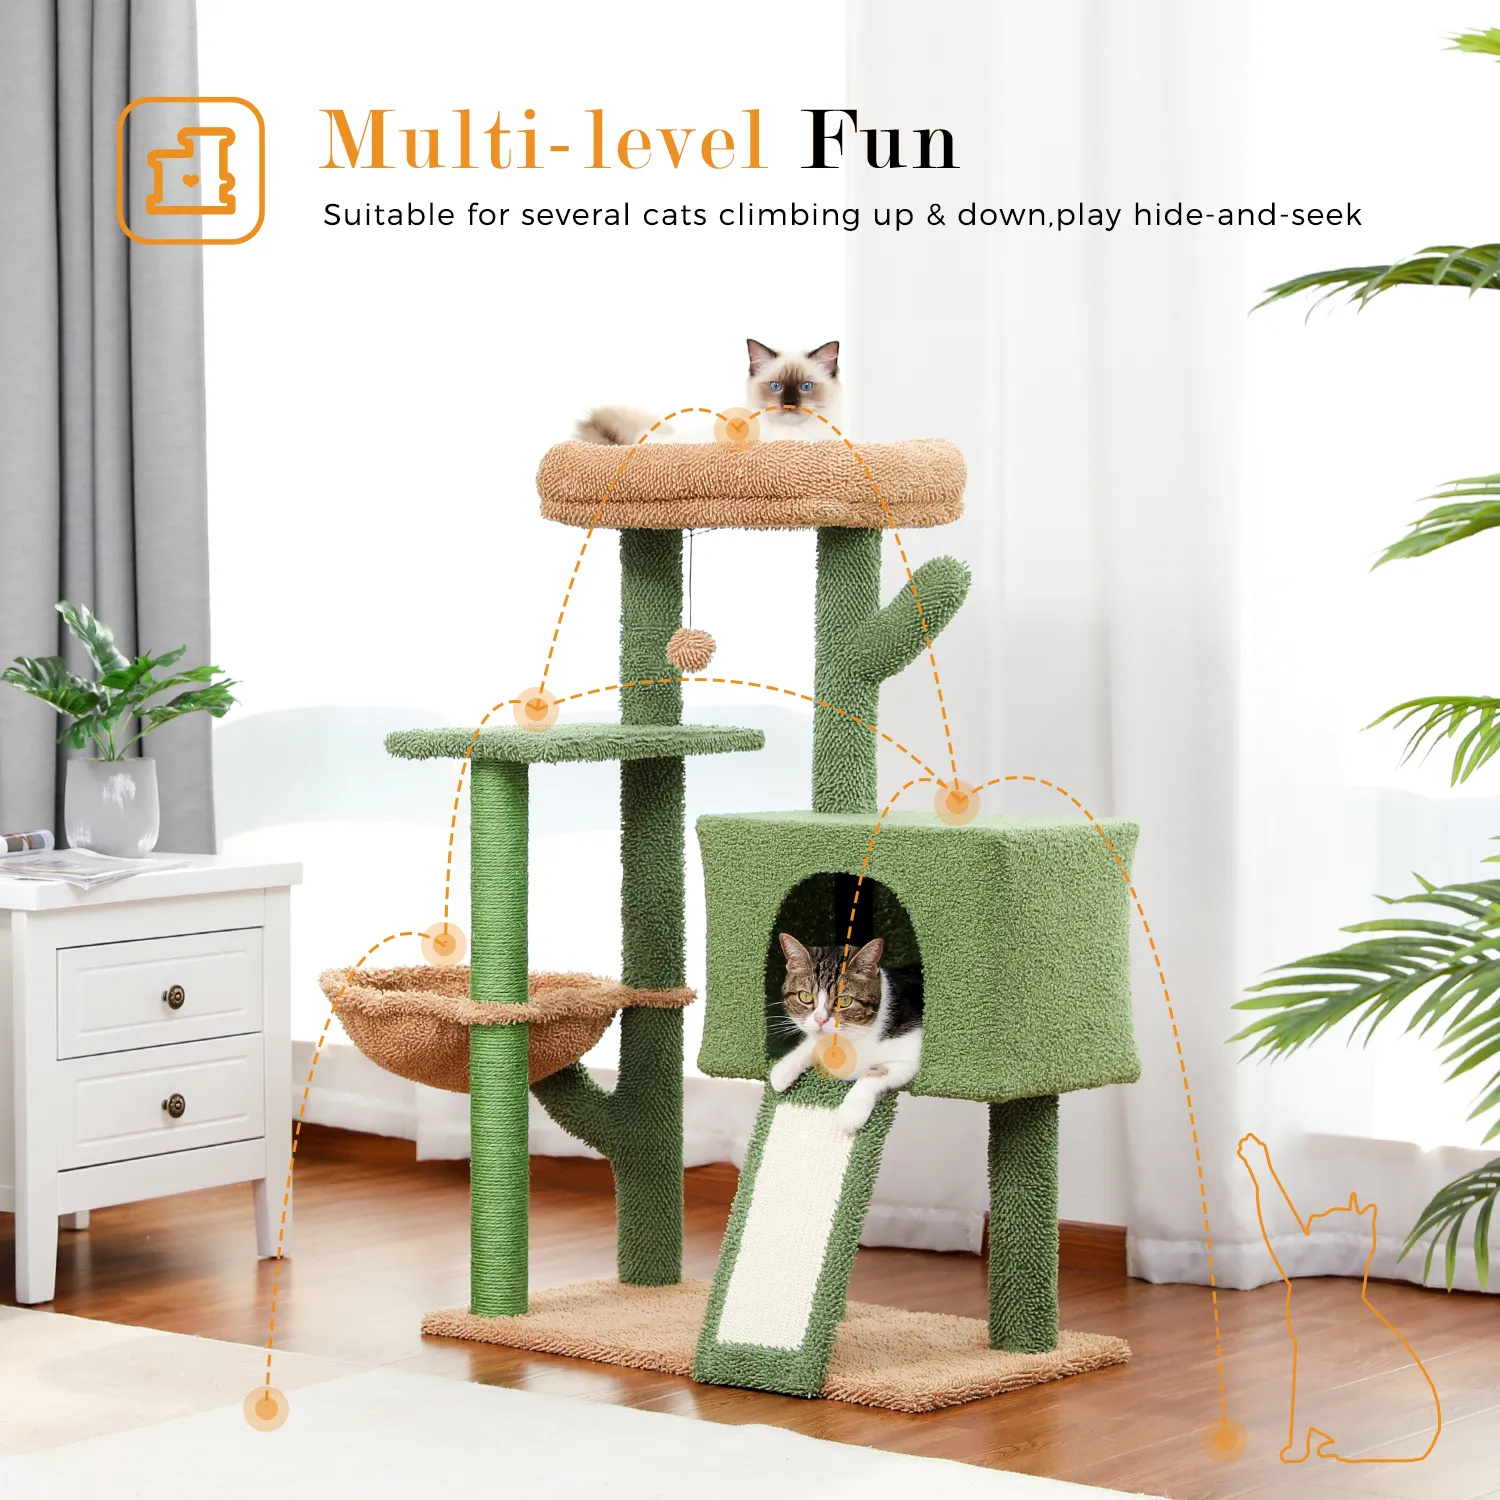 Cactus Cat Tree Tower with Sisal Scratching Post Board for Indoor Cats Condo Kitty Play House Perch rascador gato arbre à chat